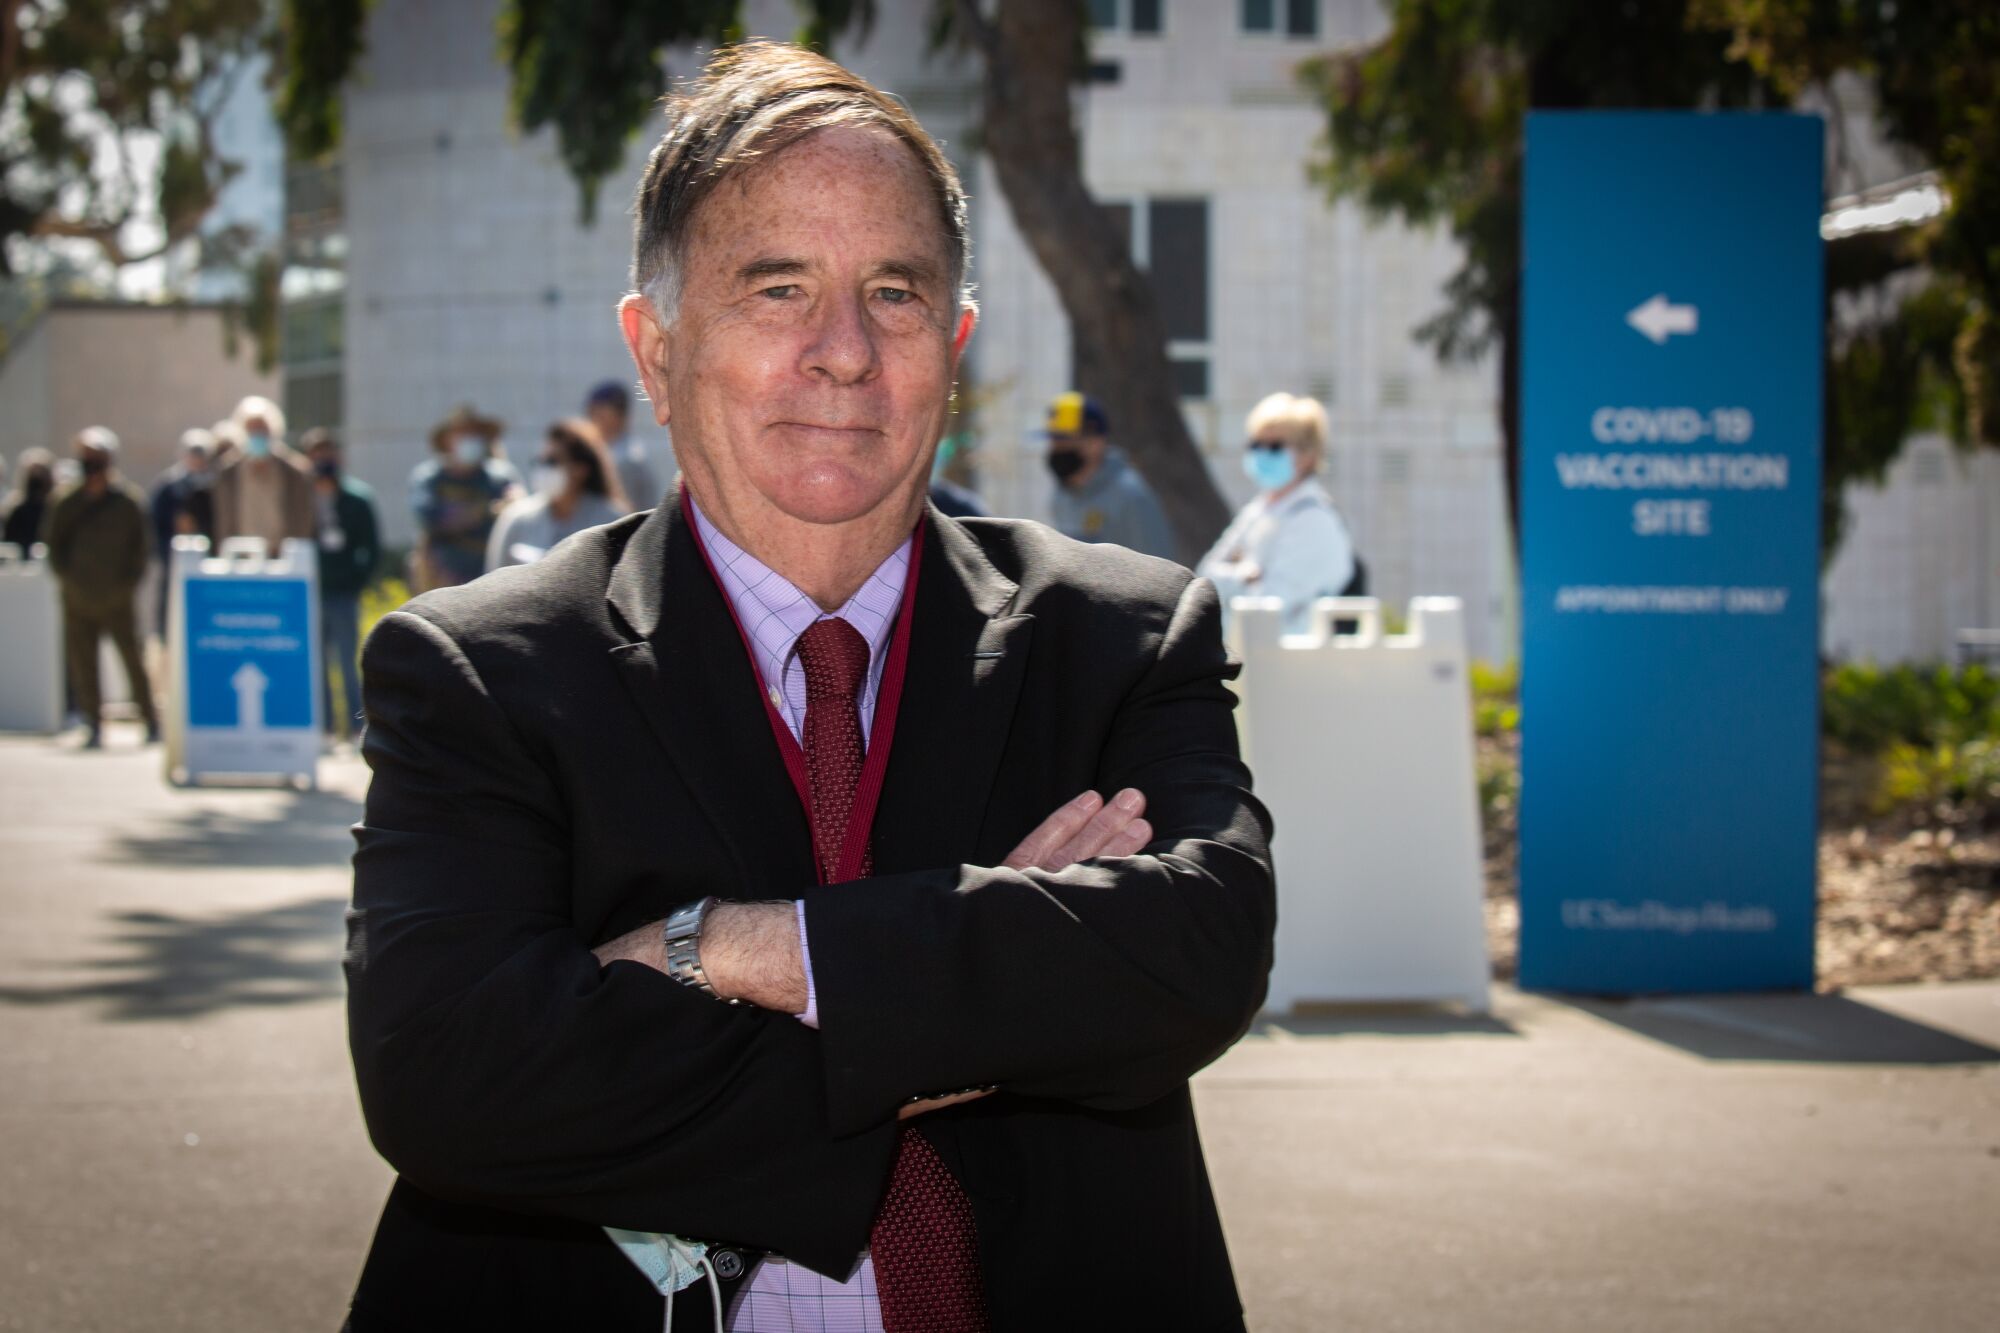 Dr. Robert "Chip" Schooley is an infectious-disease expert who is leading UC San Diego out of the COVID-19 crisis.